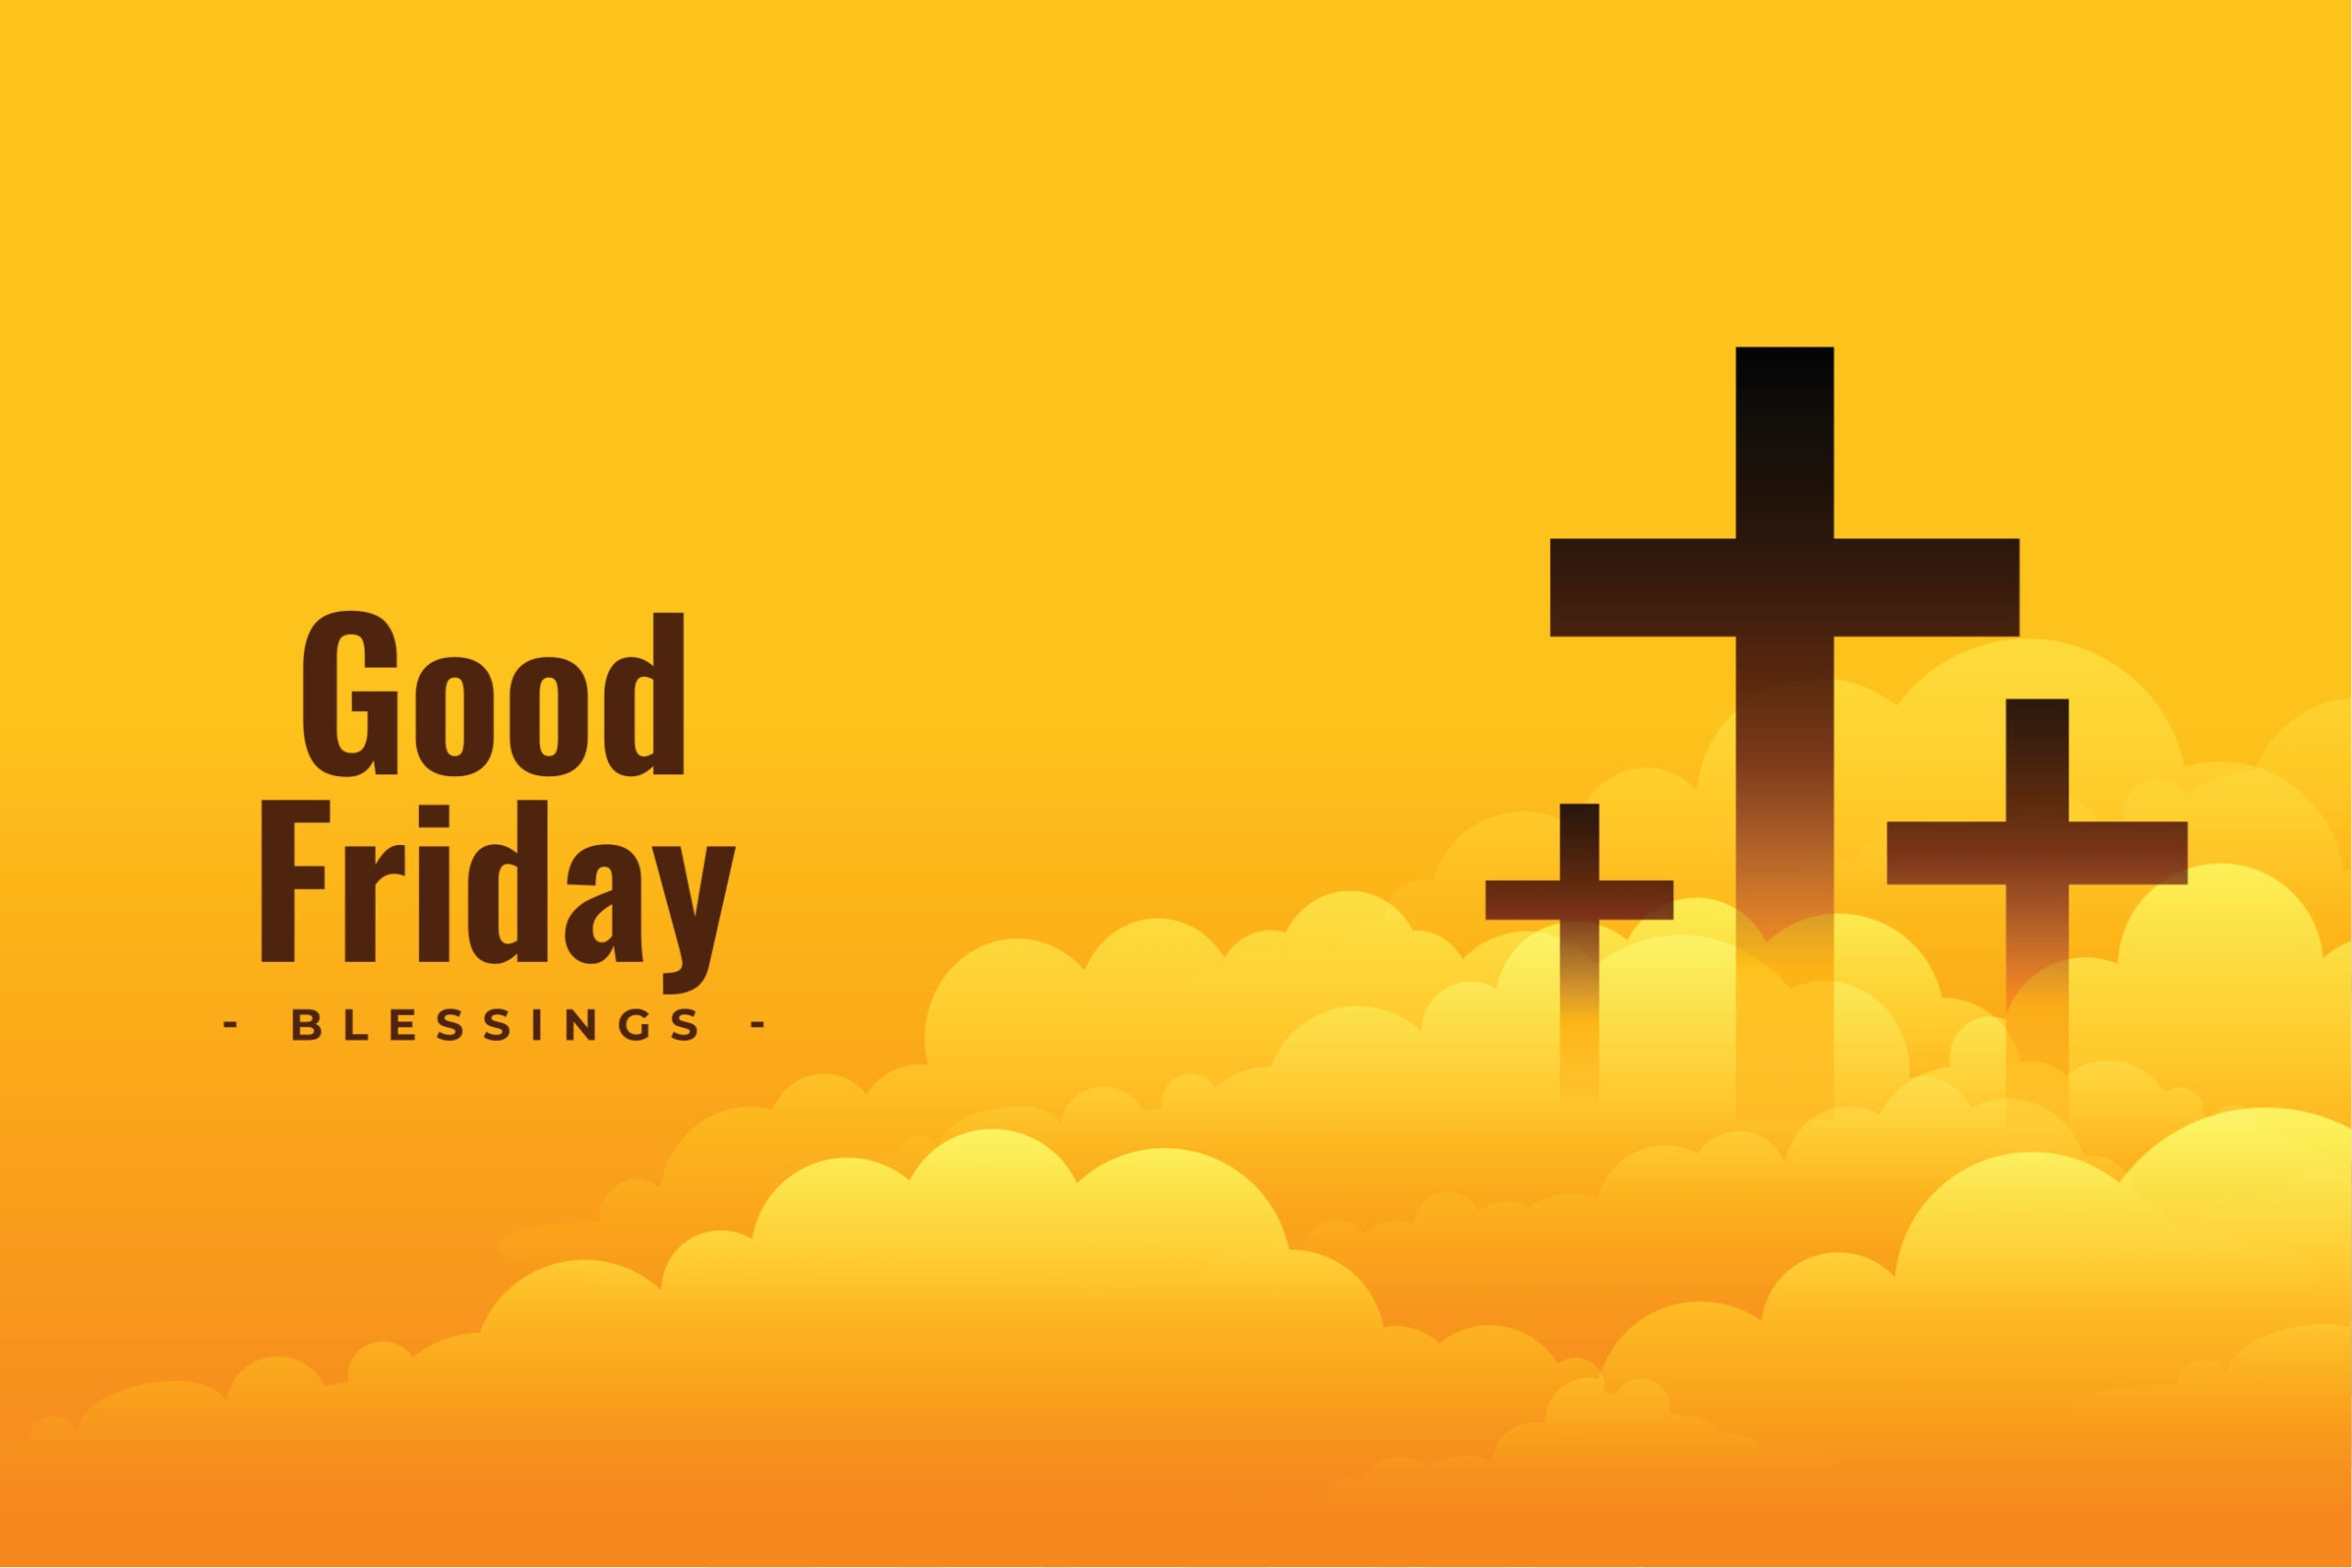 Good Friday: Reflecting on the Solemnity of Christ’s Passio